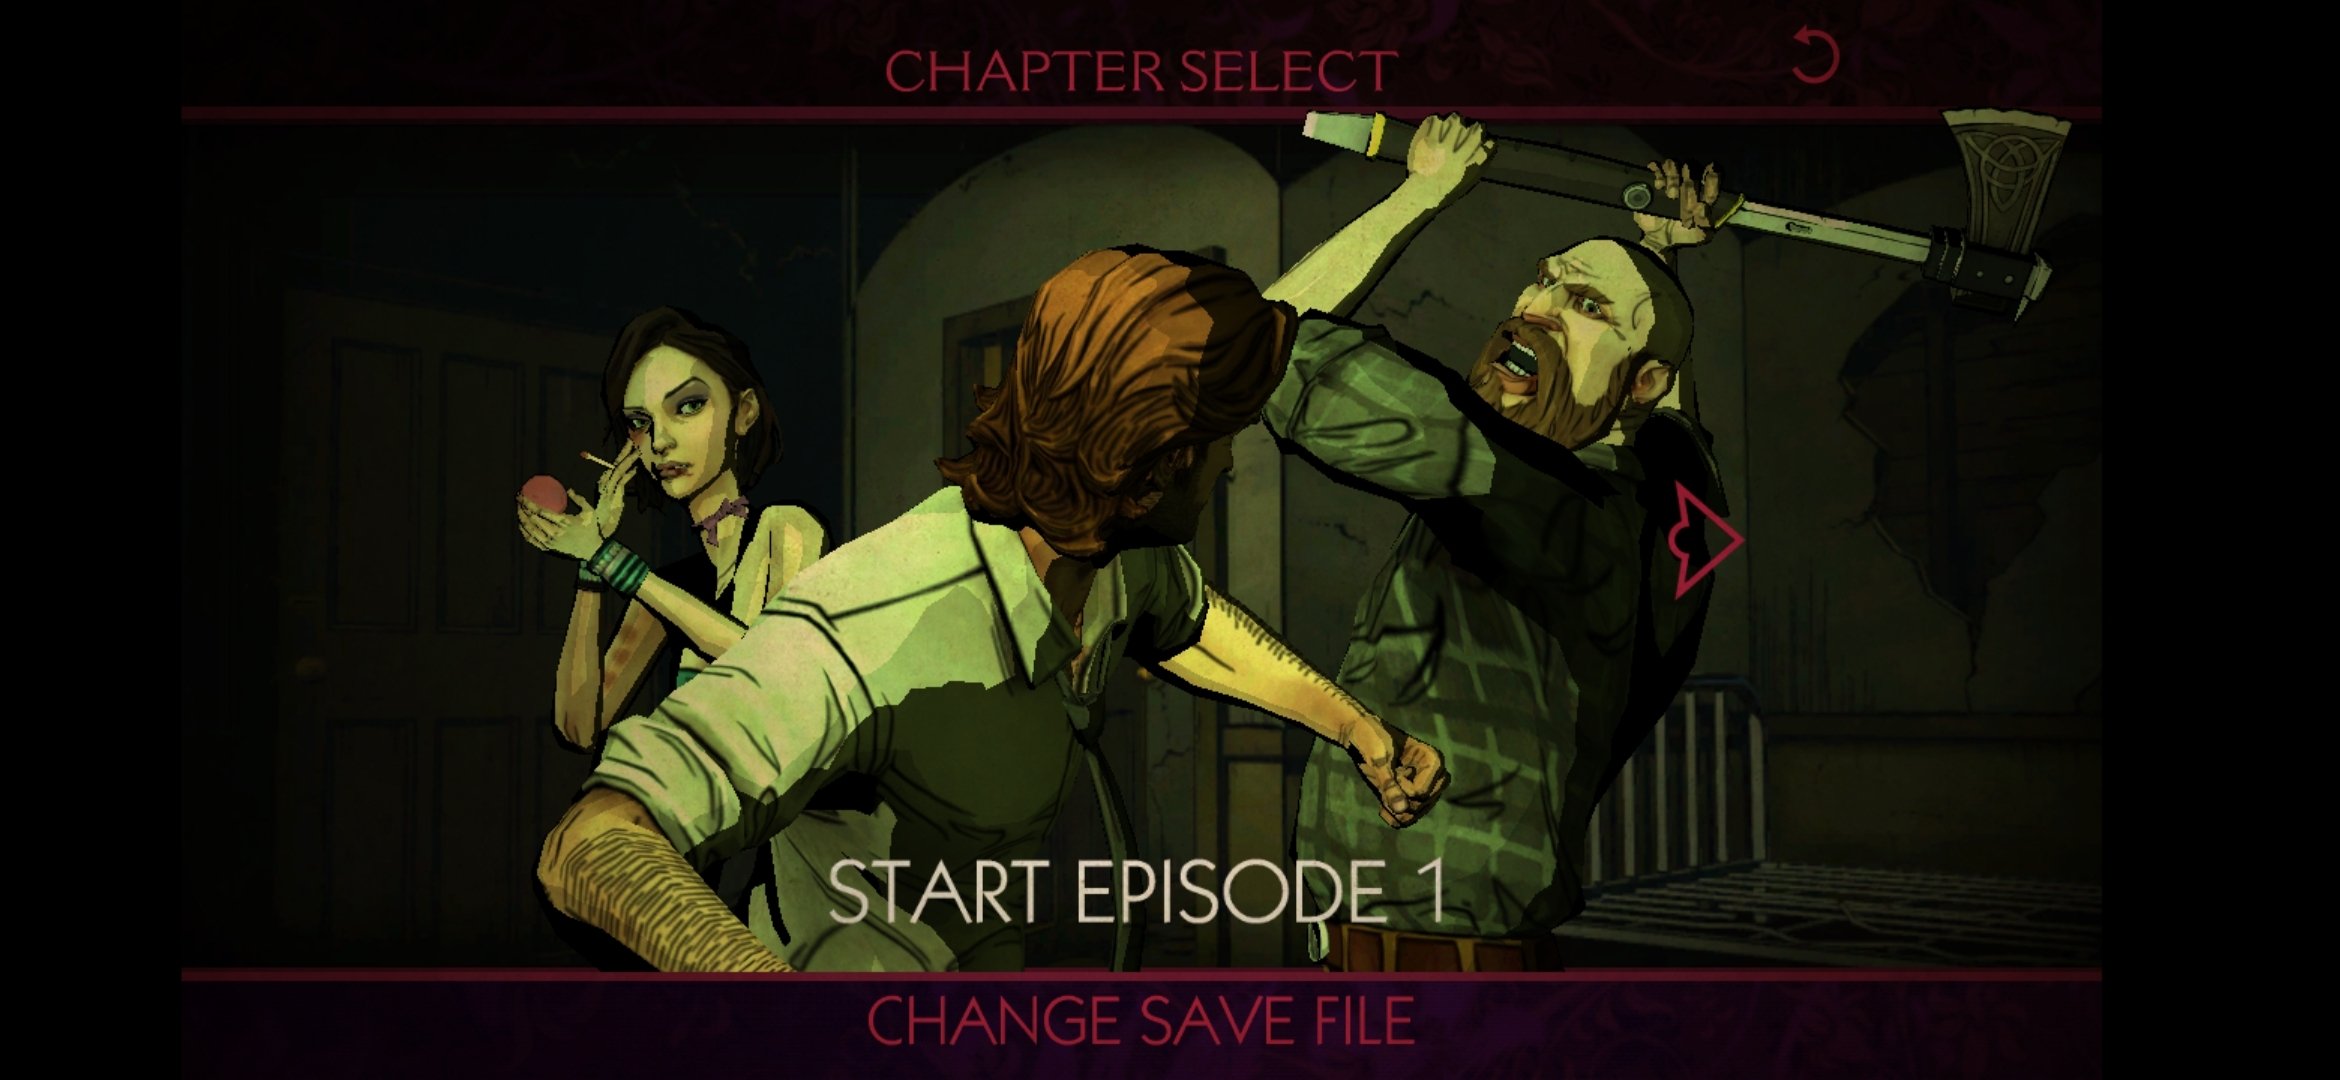 the wolf among us game pass